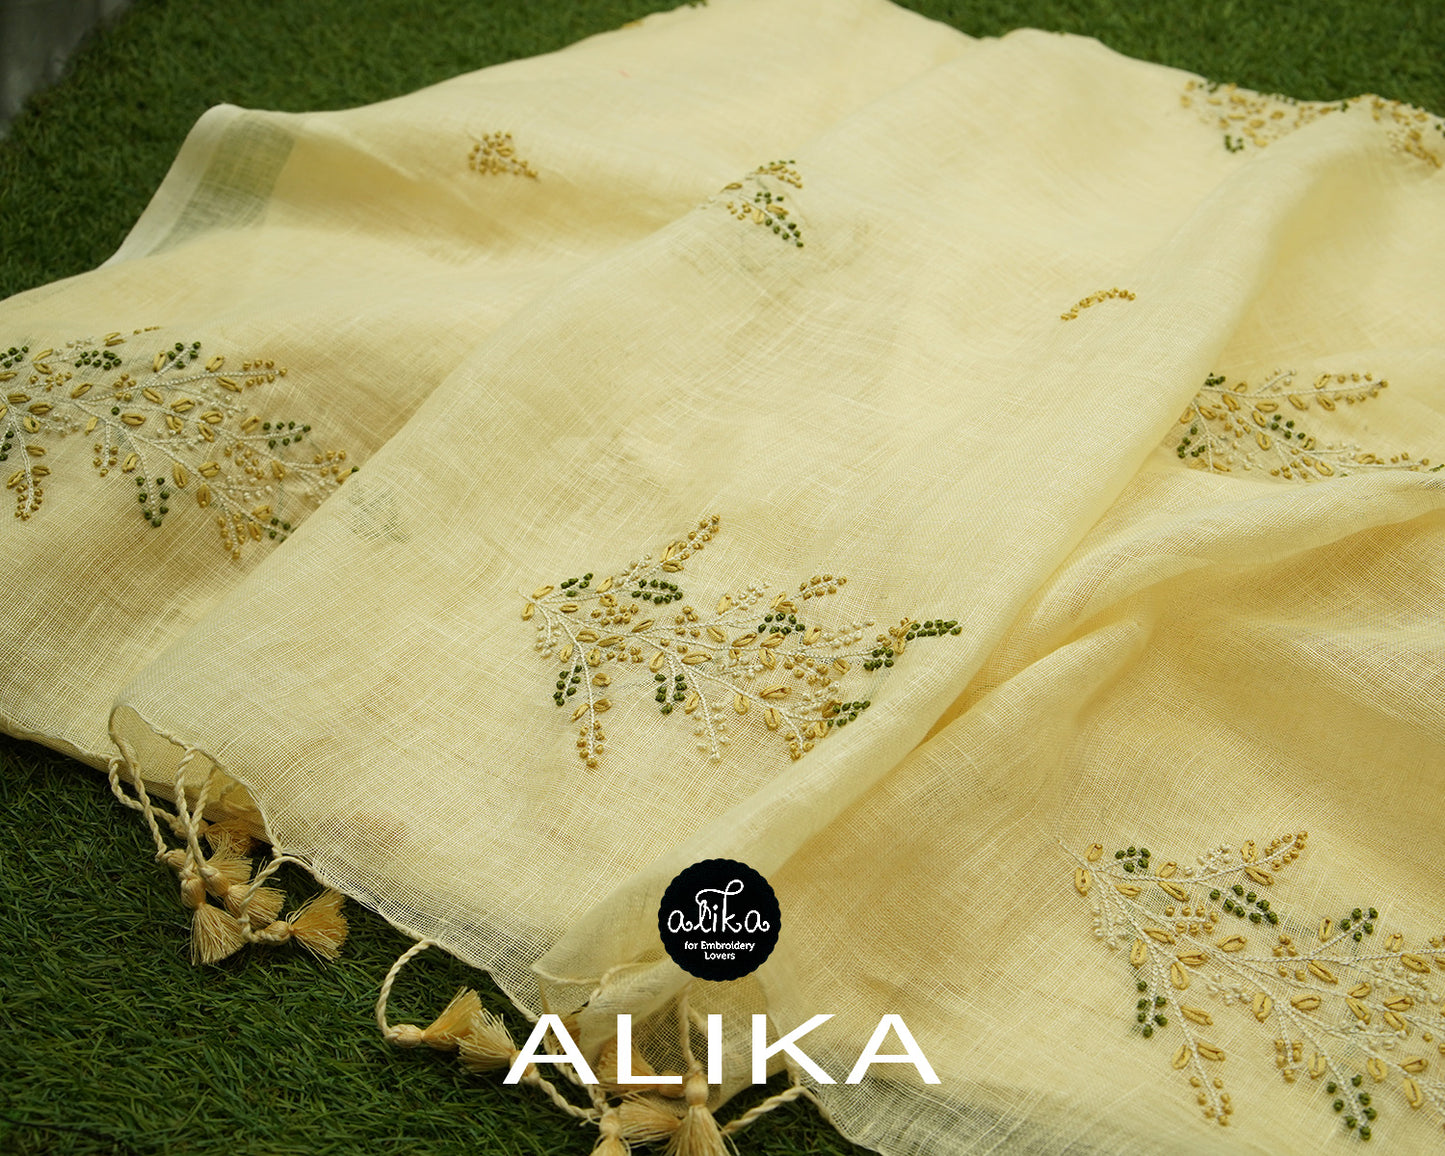 Cream shade linen drape with scattered floral bunches in pallu and small buttas across body